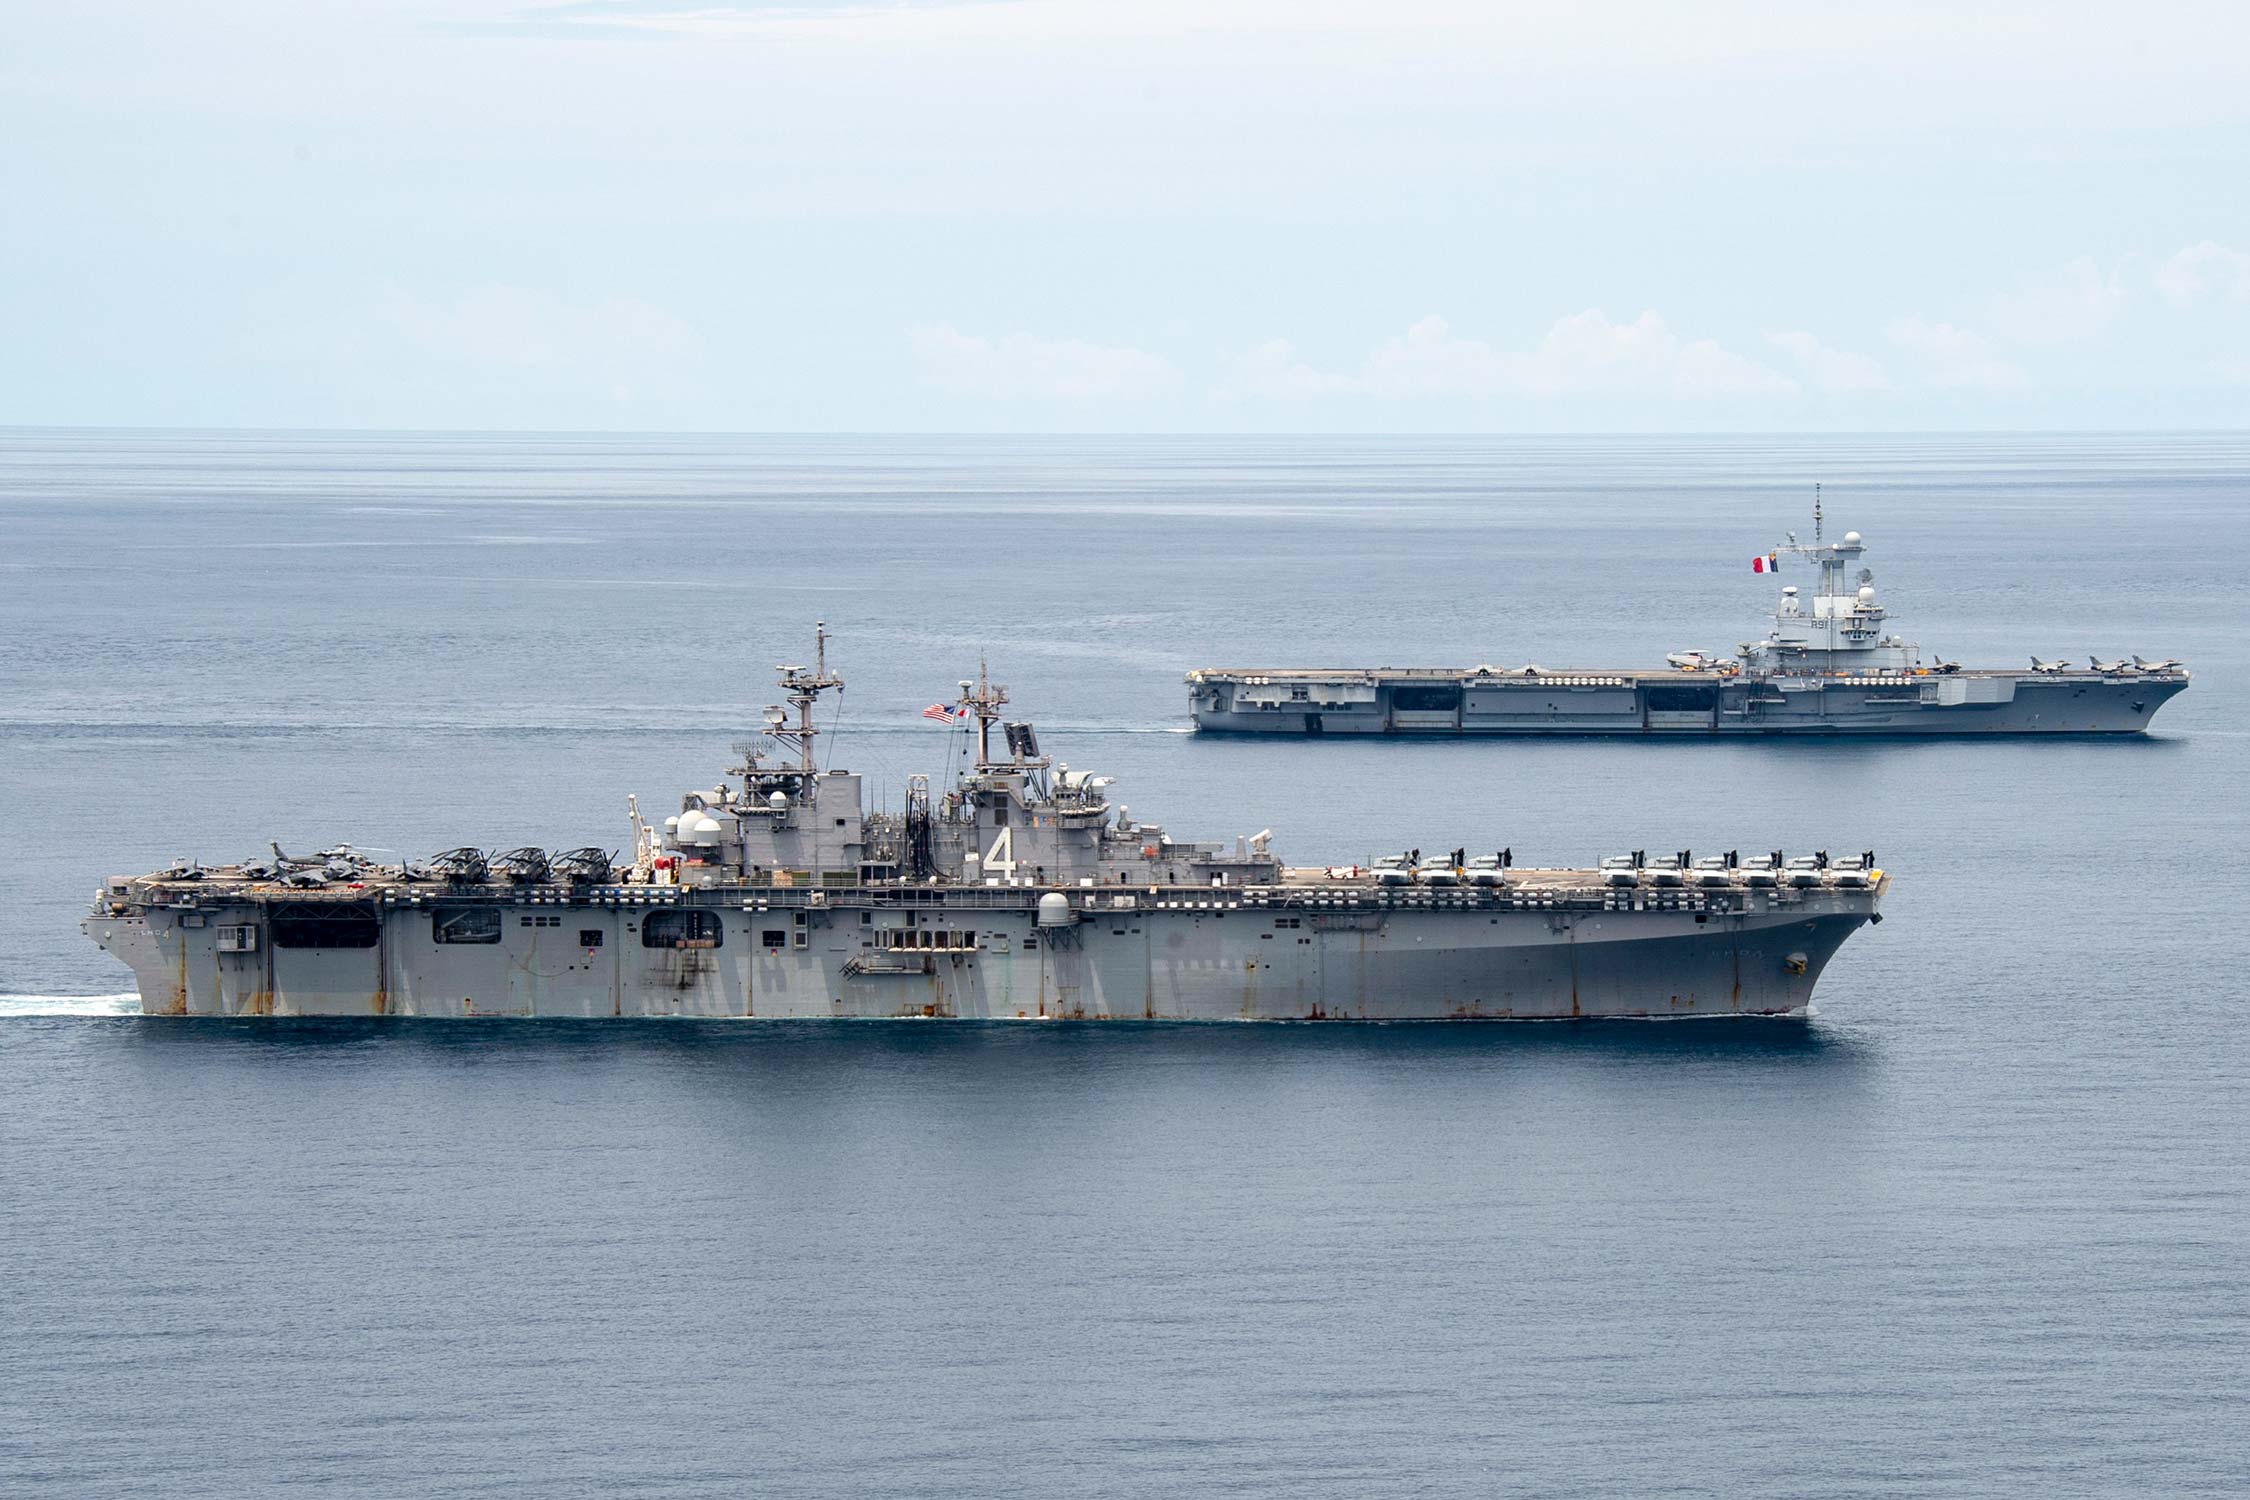 USS Boxer and FS Charles de Gaulle